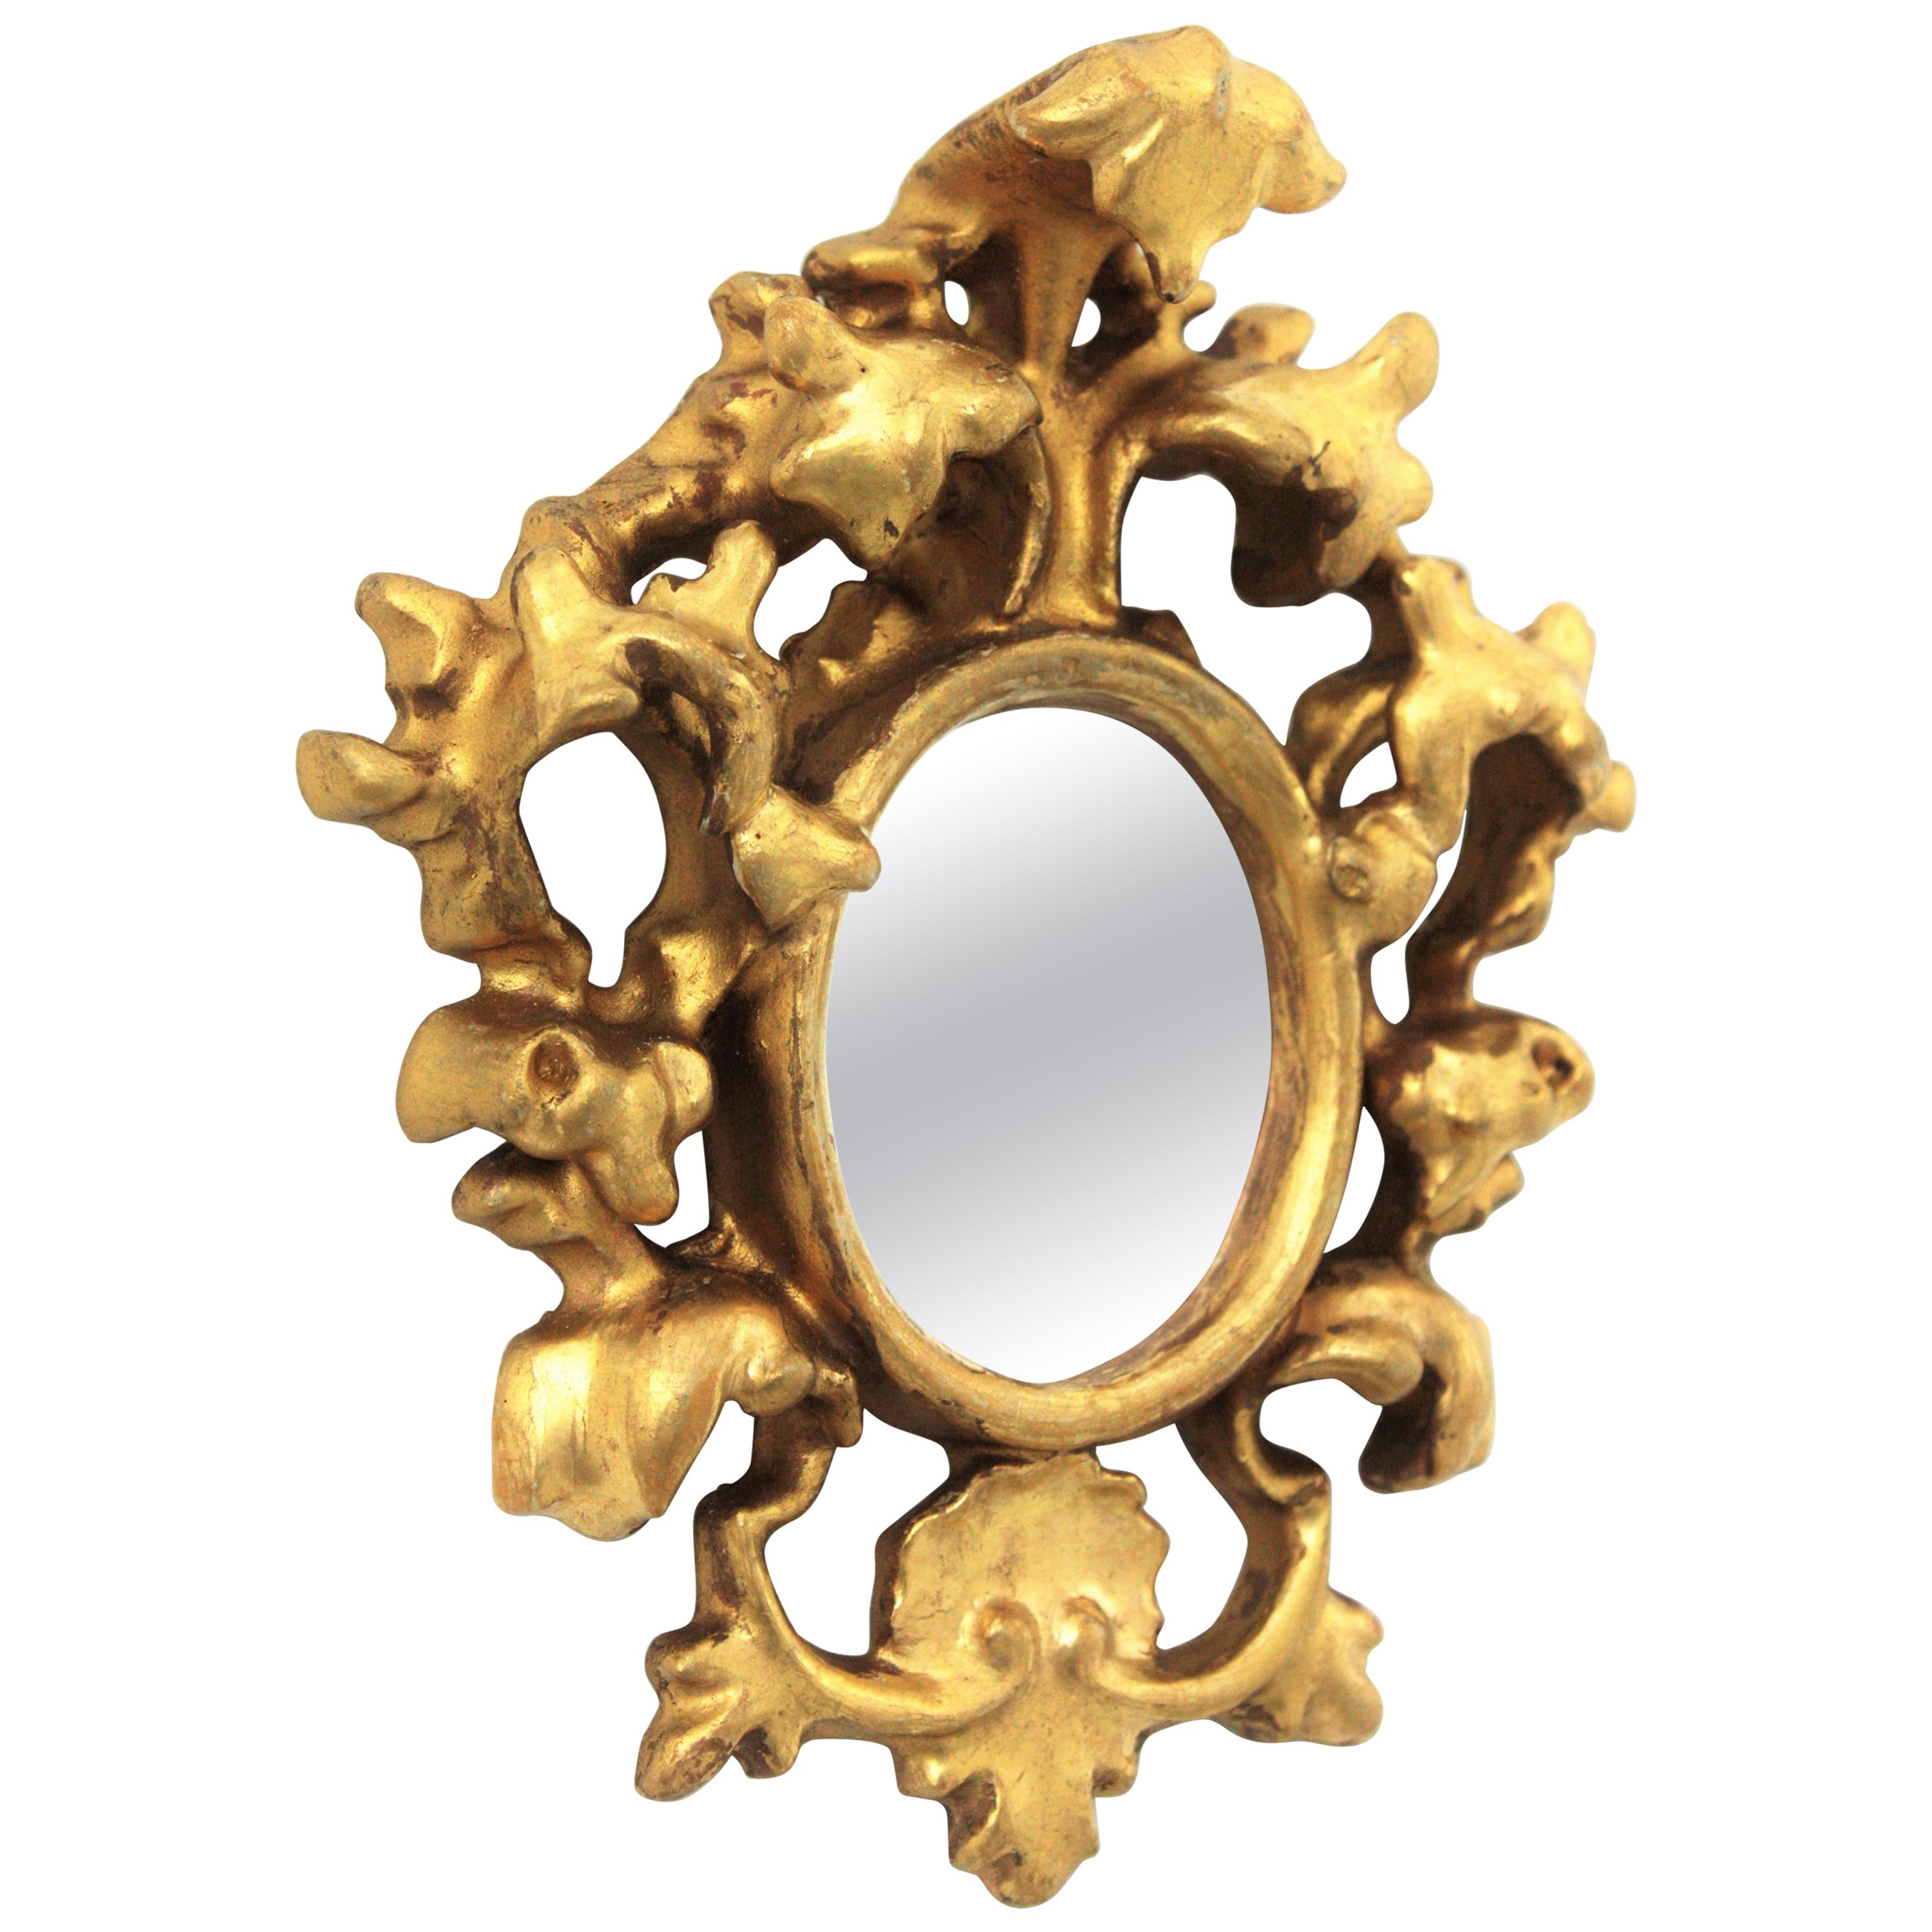 Small Scale Baroque Style Giltwood Mirror / Miniature Collection Mirror